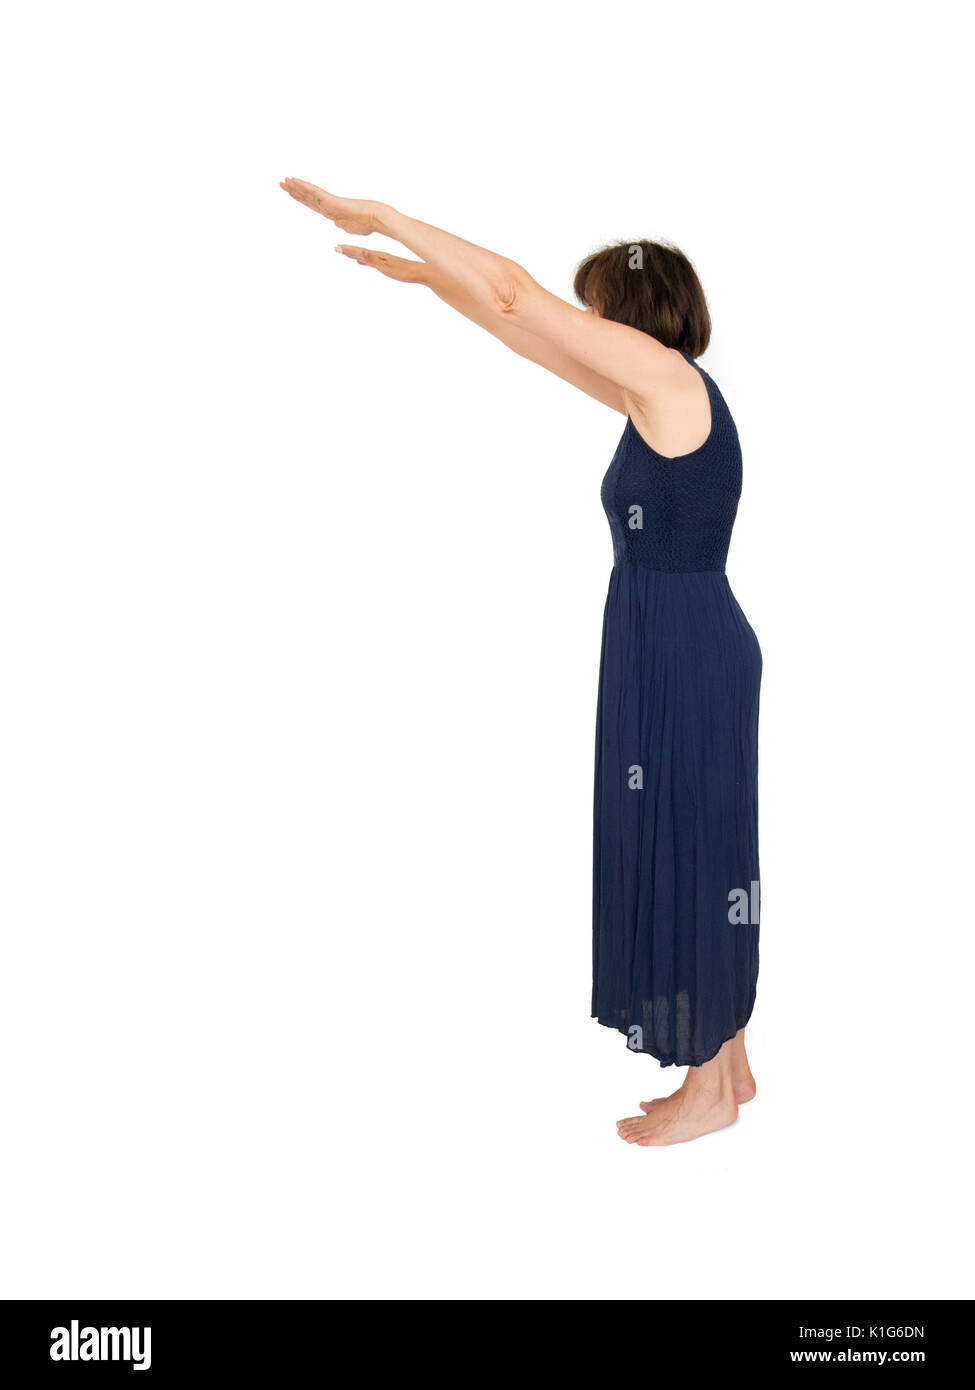 Mature lady with outstretched arms on white. Stretching, exercise maybe. Stock Photo